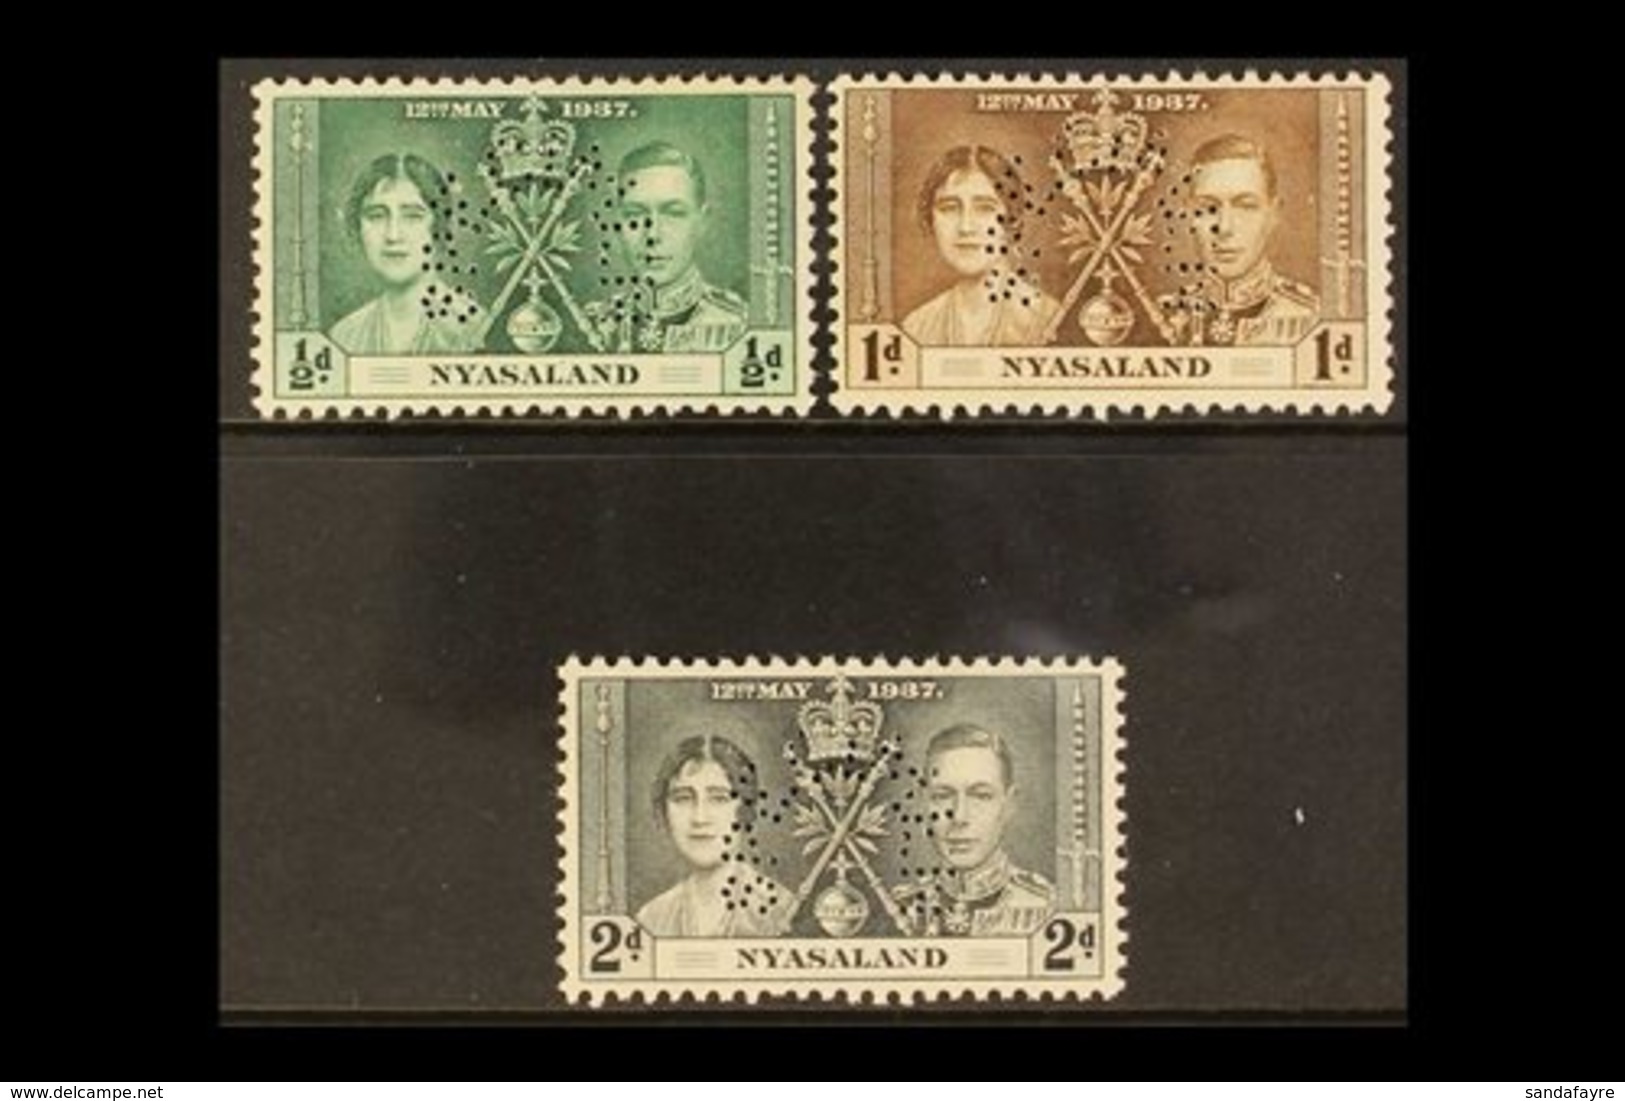 \Y 1937\Y Coronation Set Complete, Perforated "Specimen", SG 127s/129s, Very Fine Mint. (3 Stamps) For More Images, Plea - Nyasaland (1907-1953)